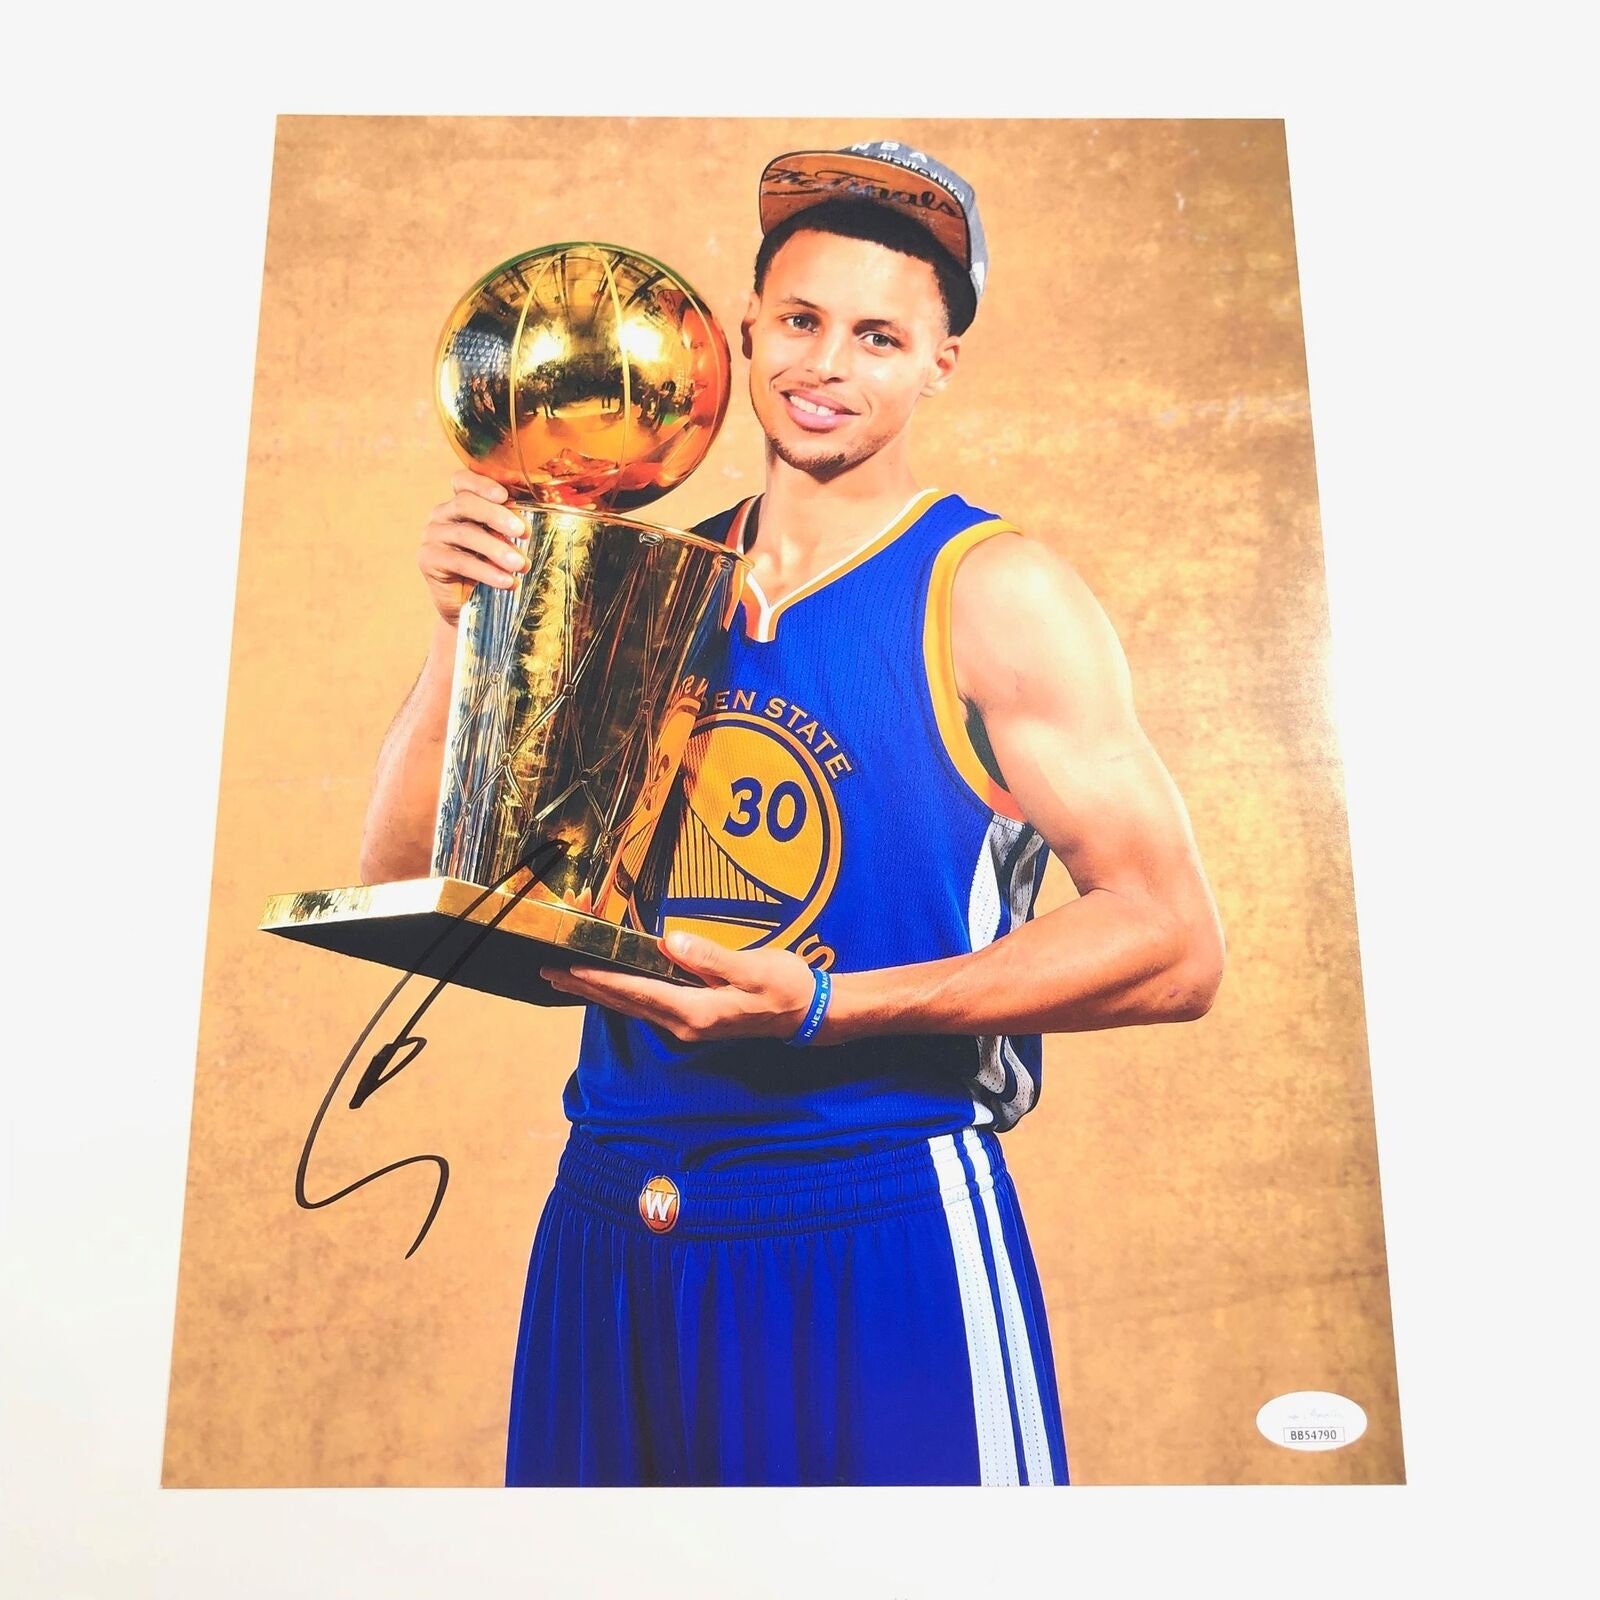  Stephen Curry Rookie Card RC 2009 Autograph Express Golden  State Warriors Steph Curry : Collectibles & Fine Art